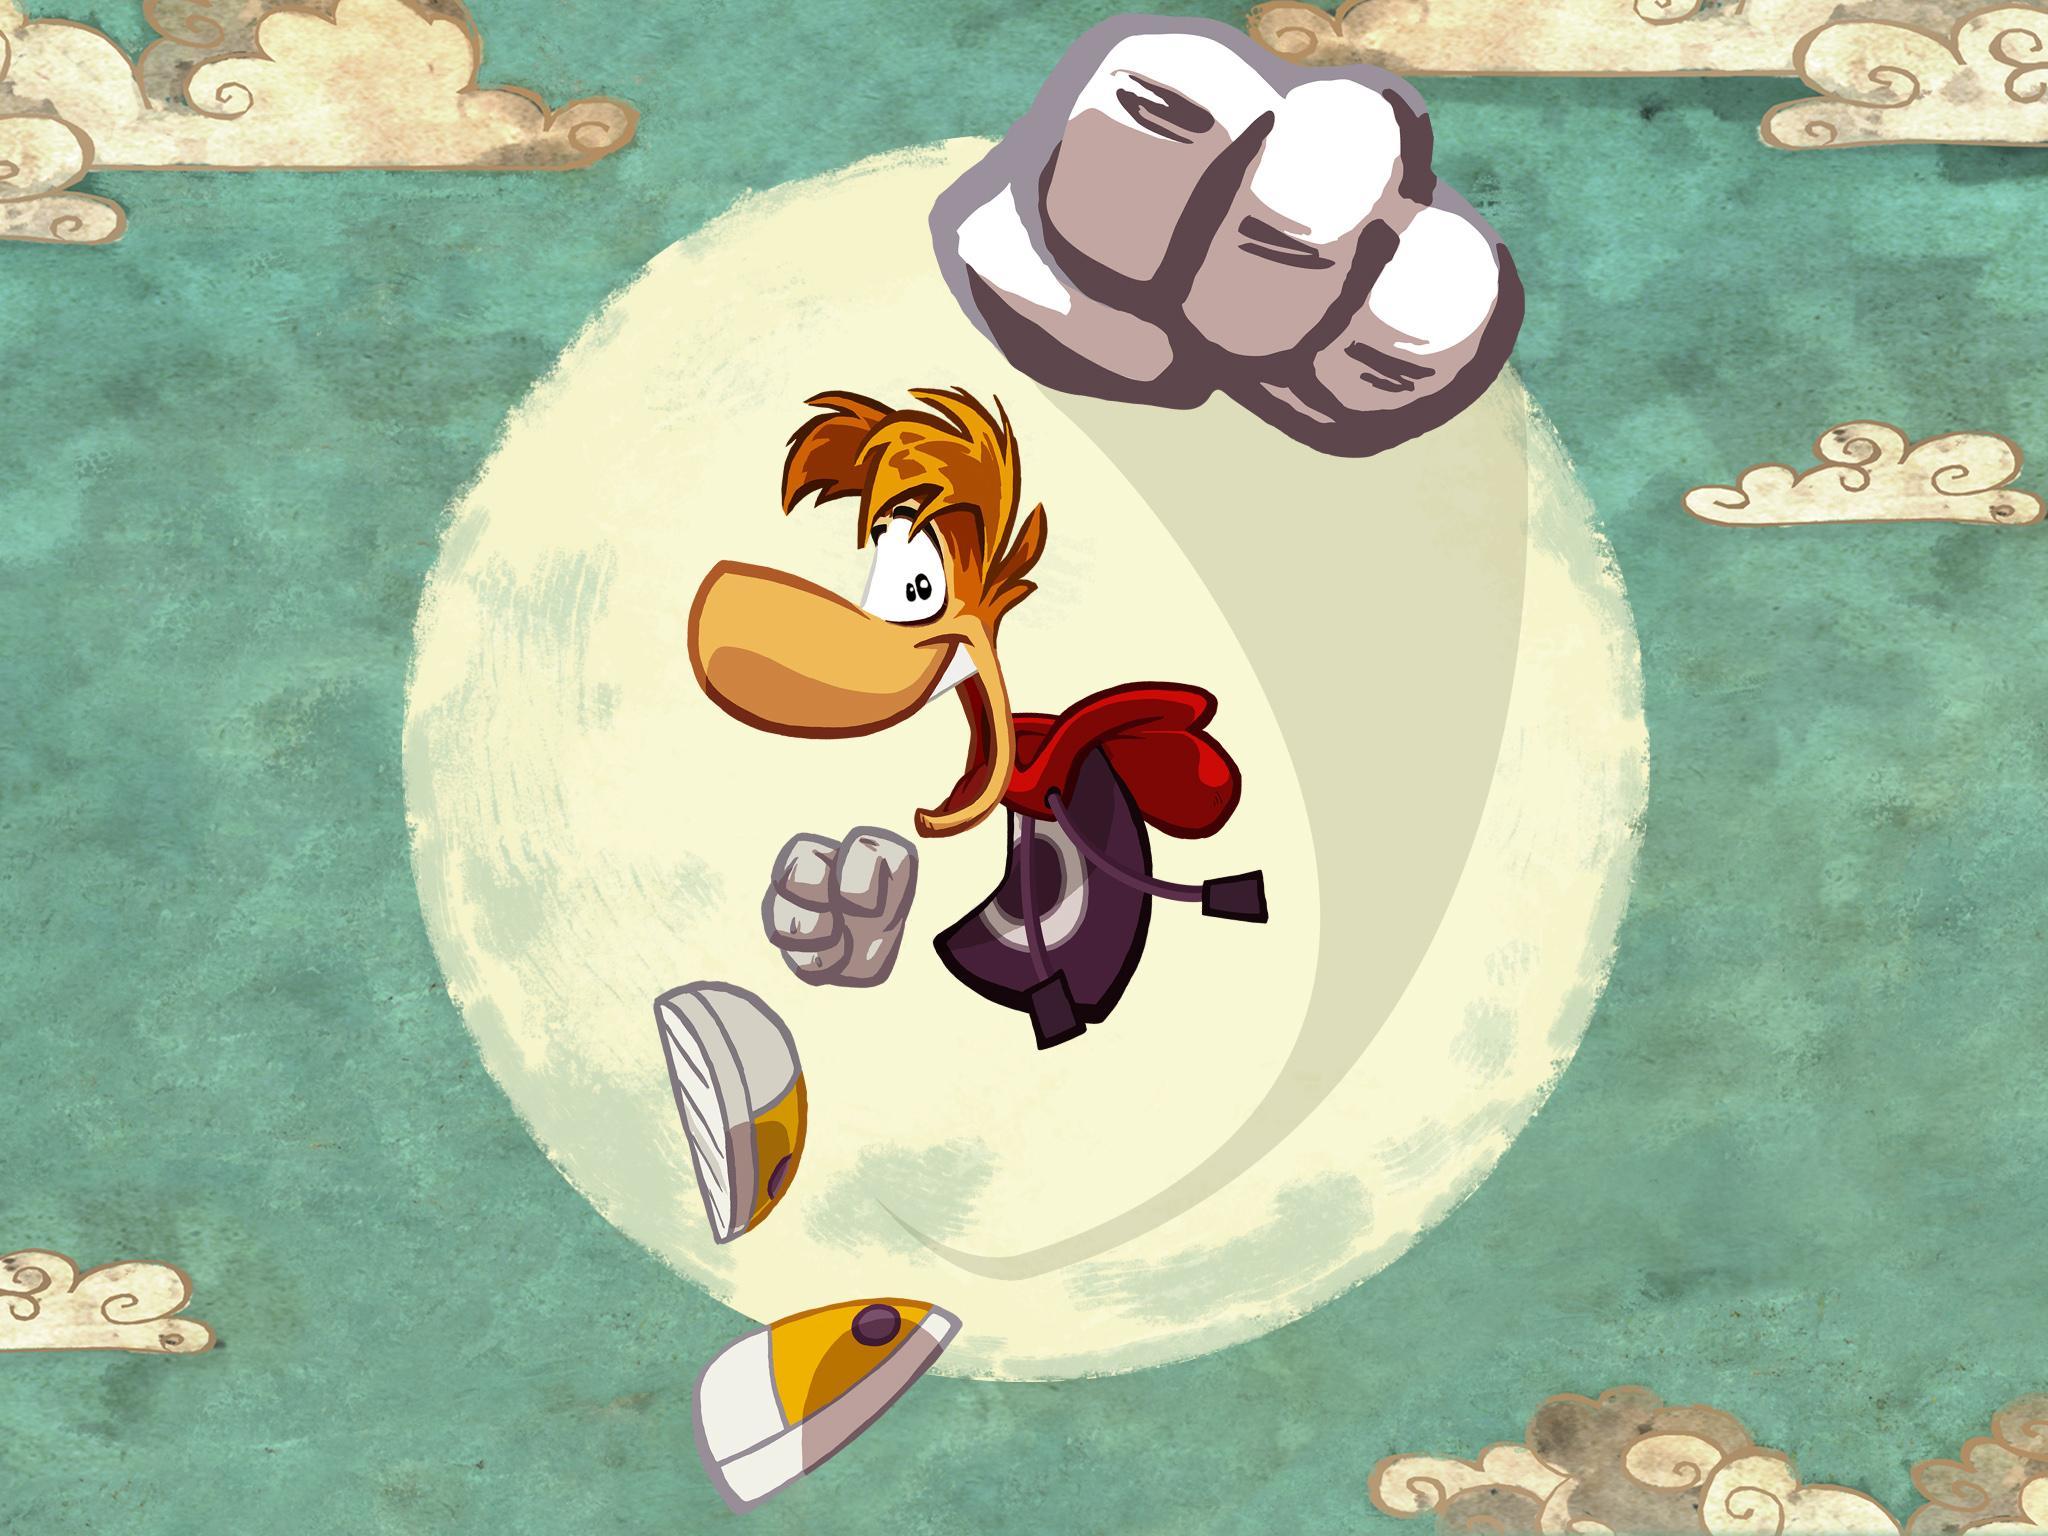 Appfilm. Rayman Jungle Run Review but sweet